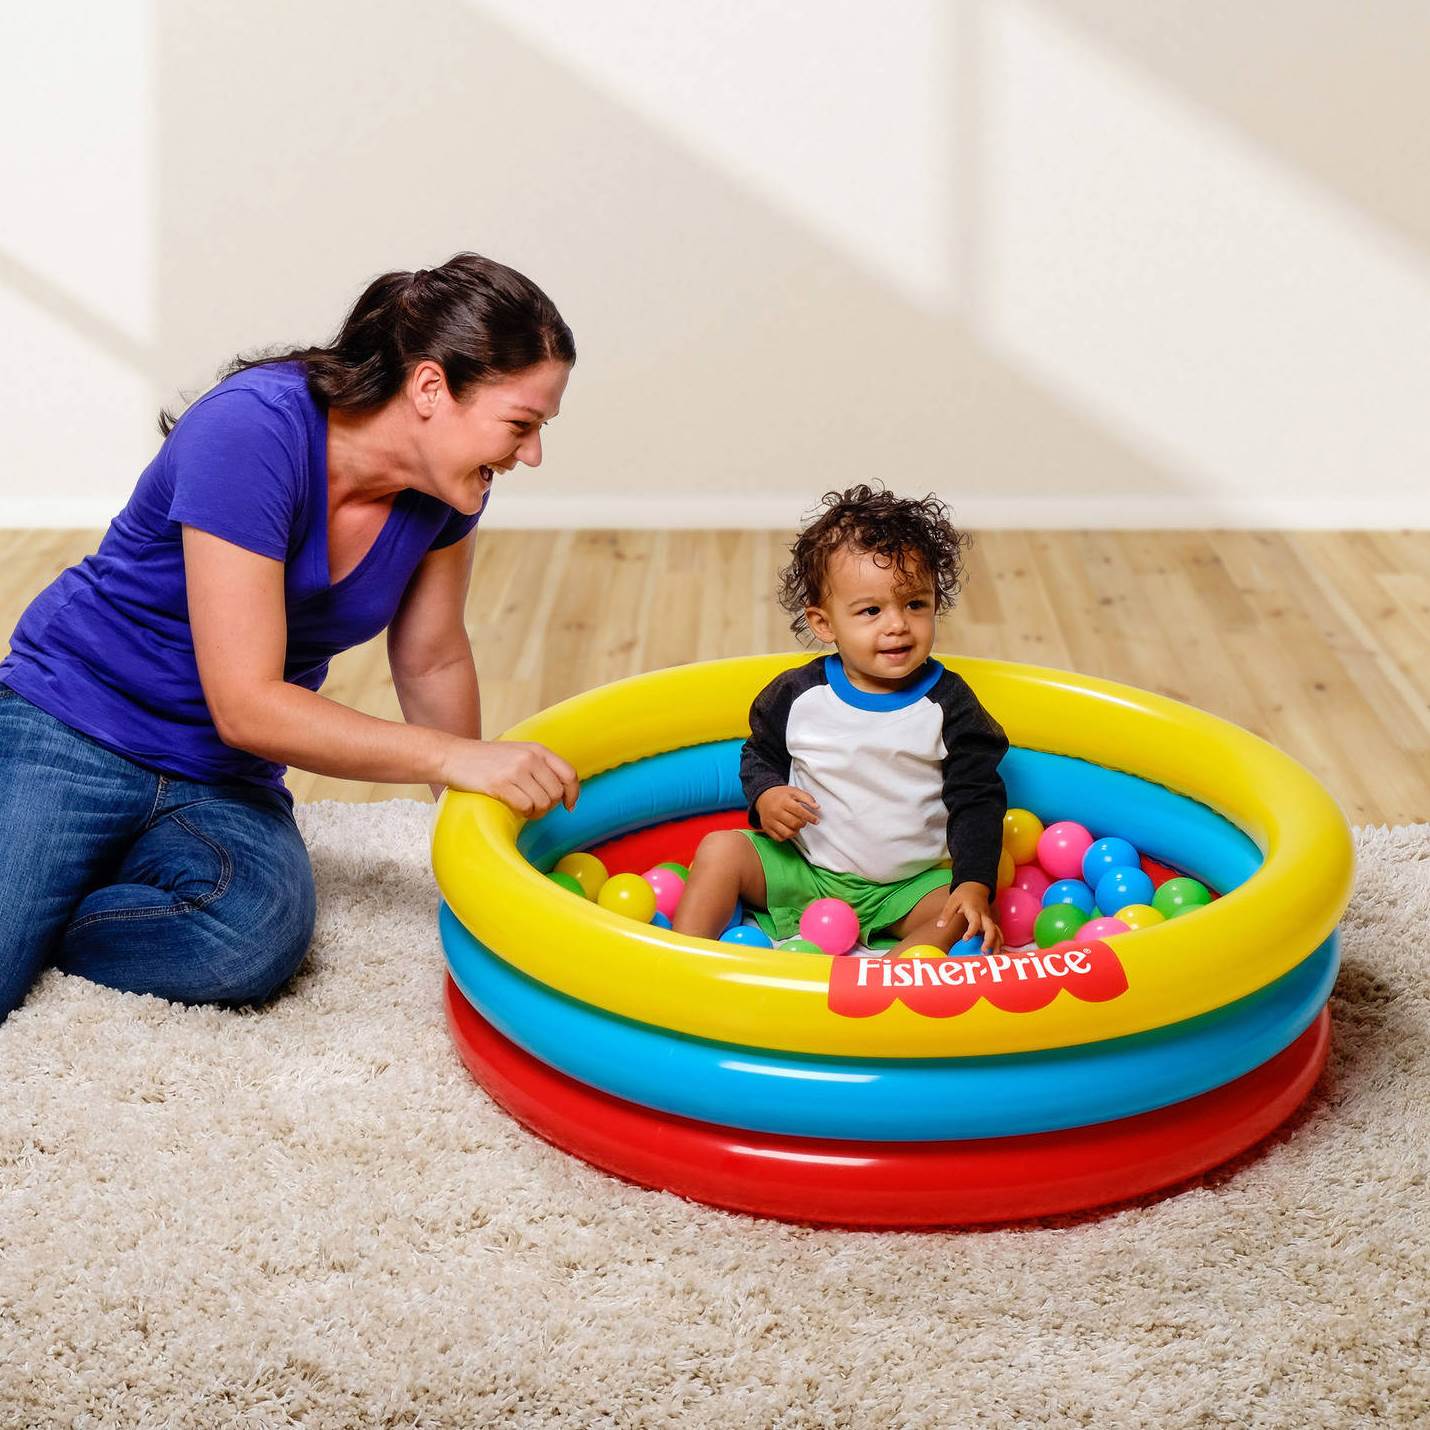 Fisher-Price 3 Ring Fun And Colorful Ball Pit Pool For Ages 2 And Up | 93501E-BW - image 5 of 5